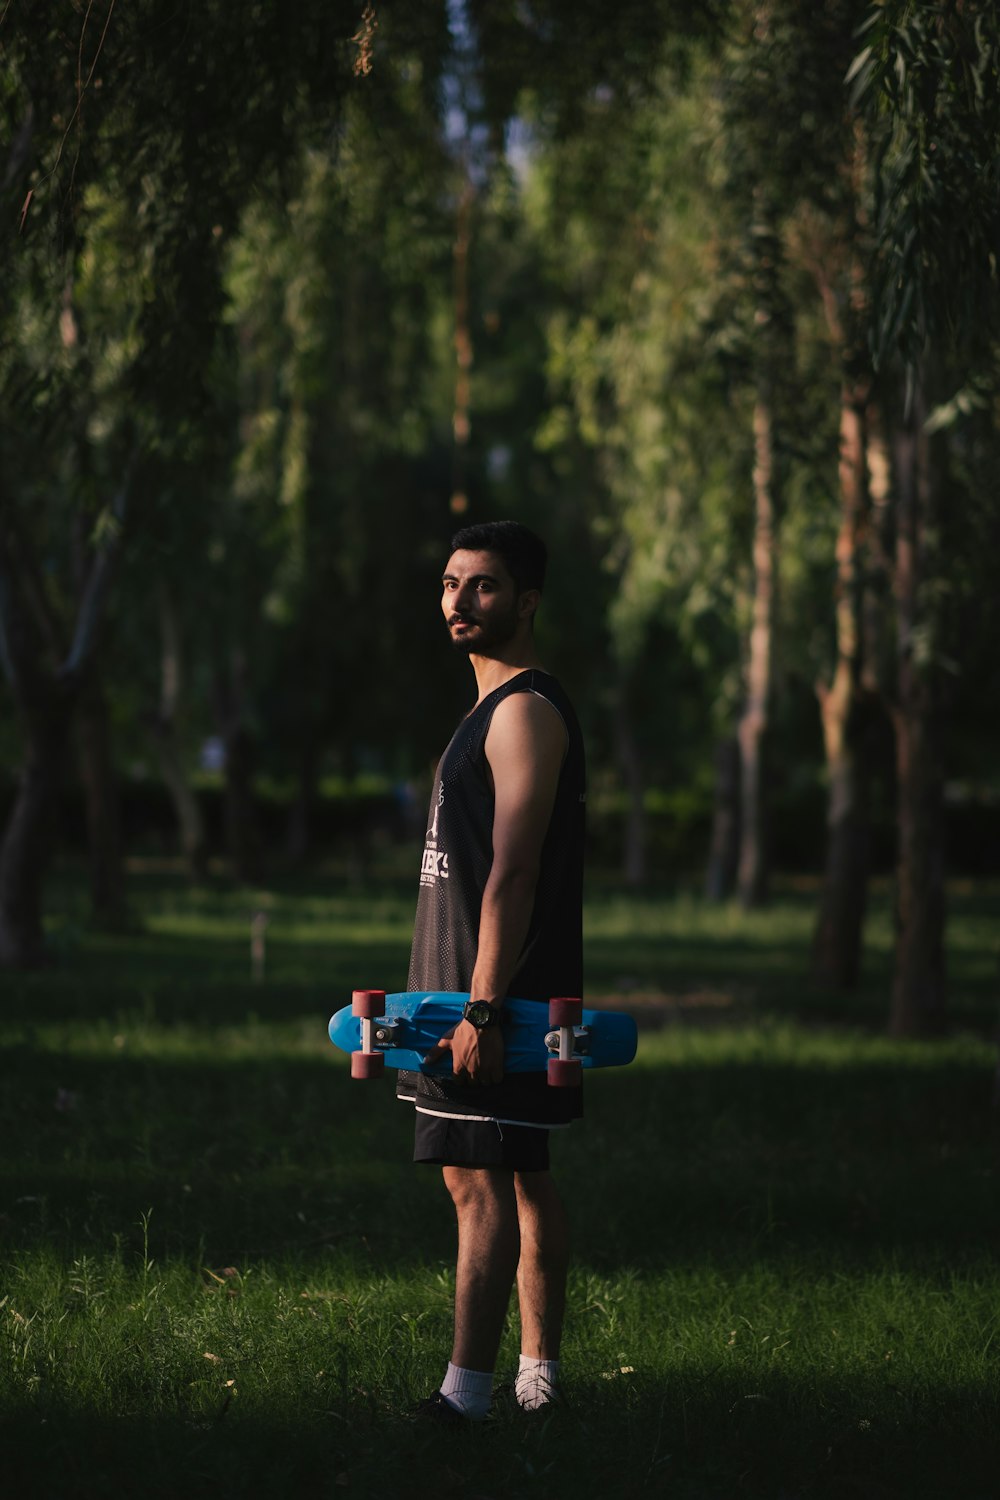 a man holding a skateboard in a park